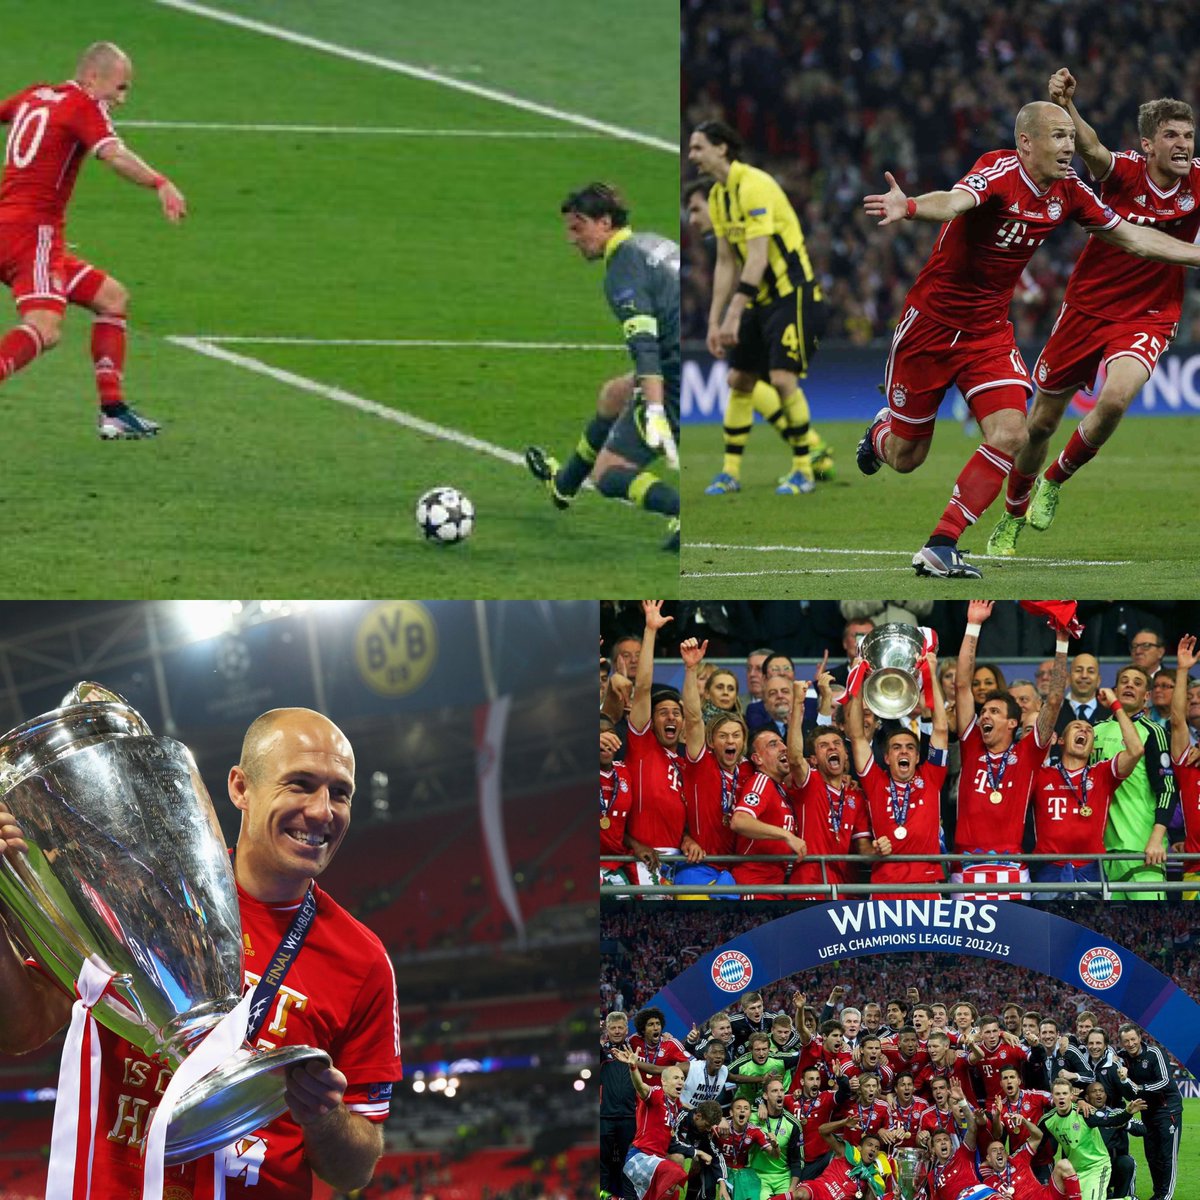 On this day in 2013 (11 years ago), Bayern Munich won the Champions League for the 5th time. 🏆